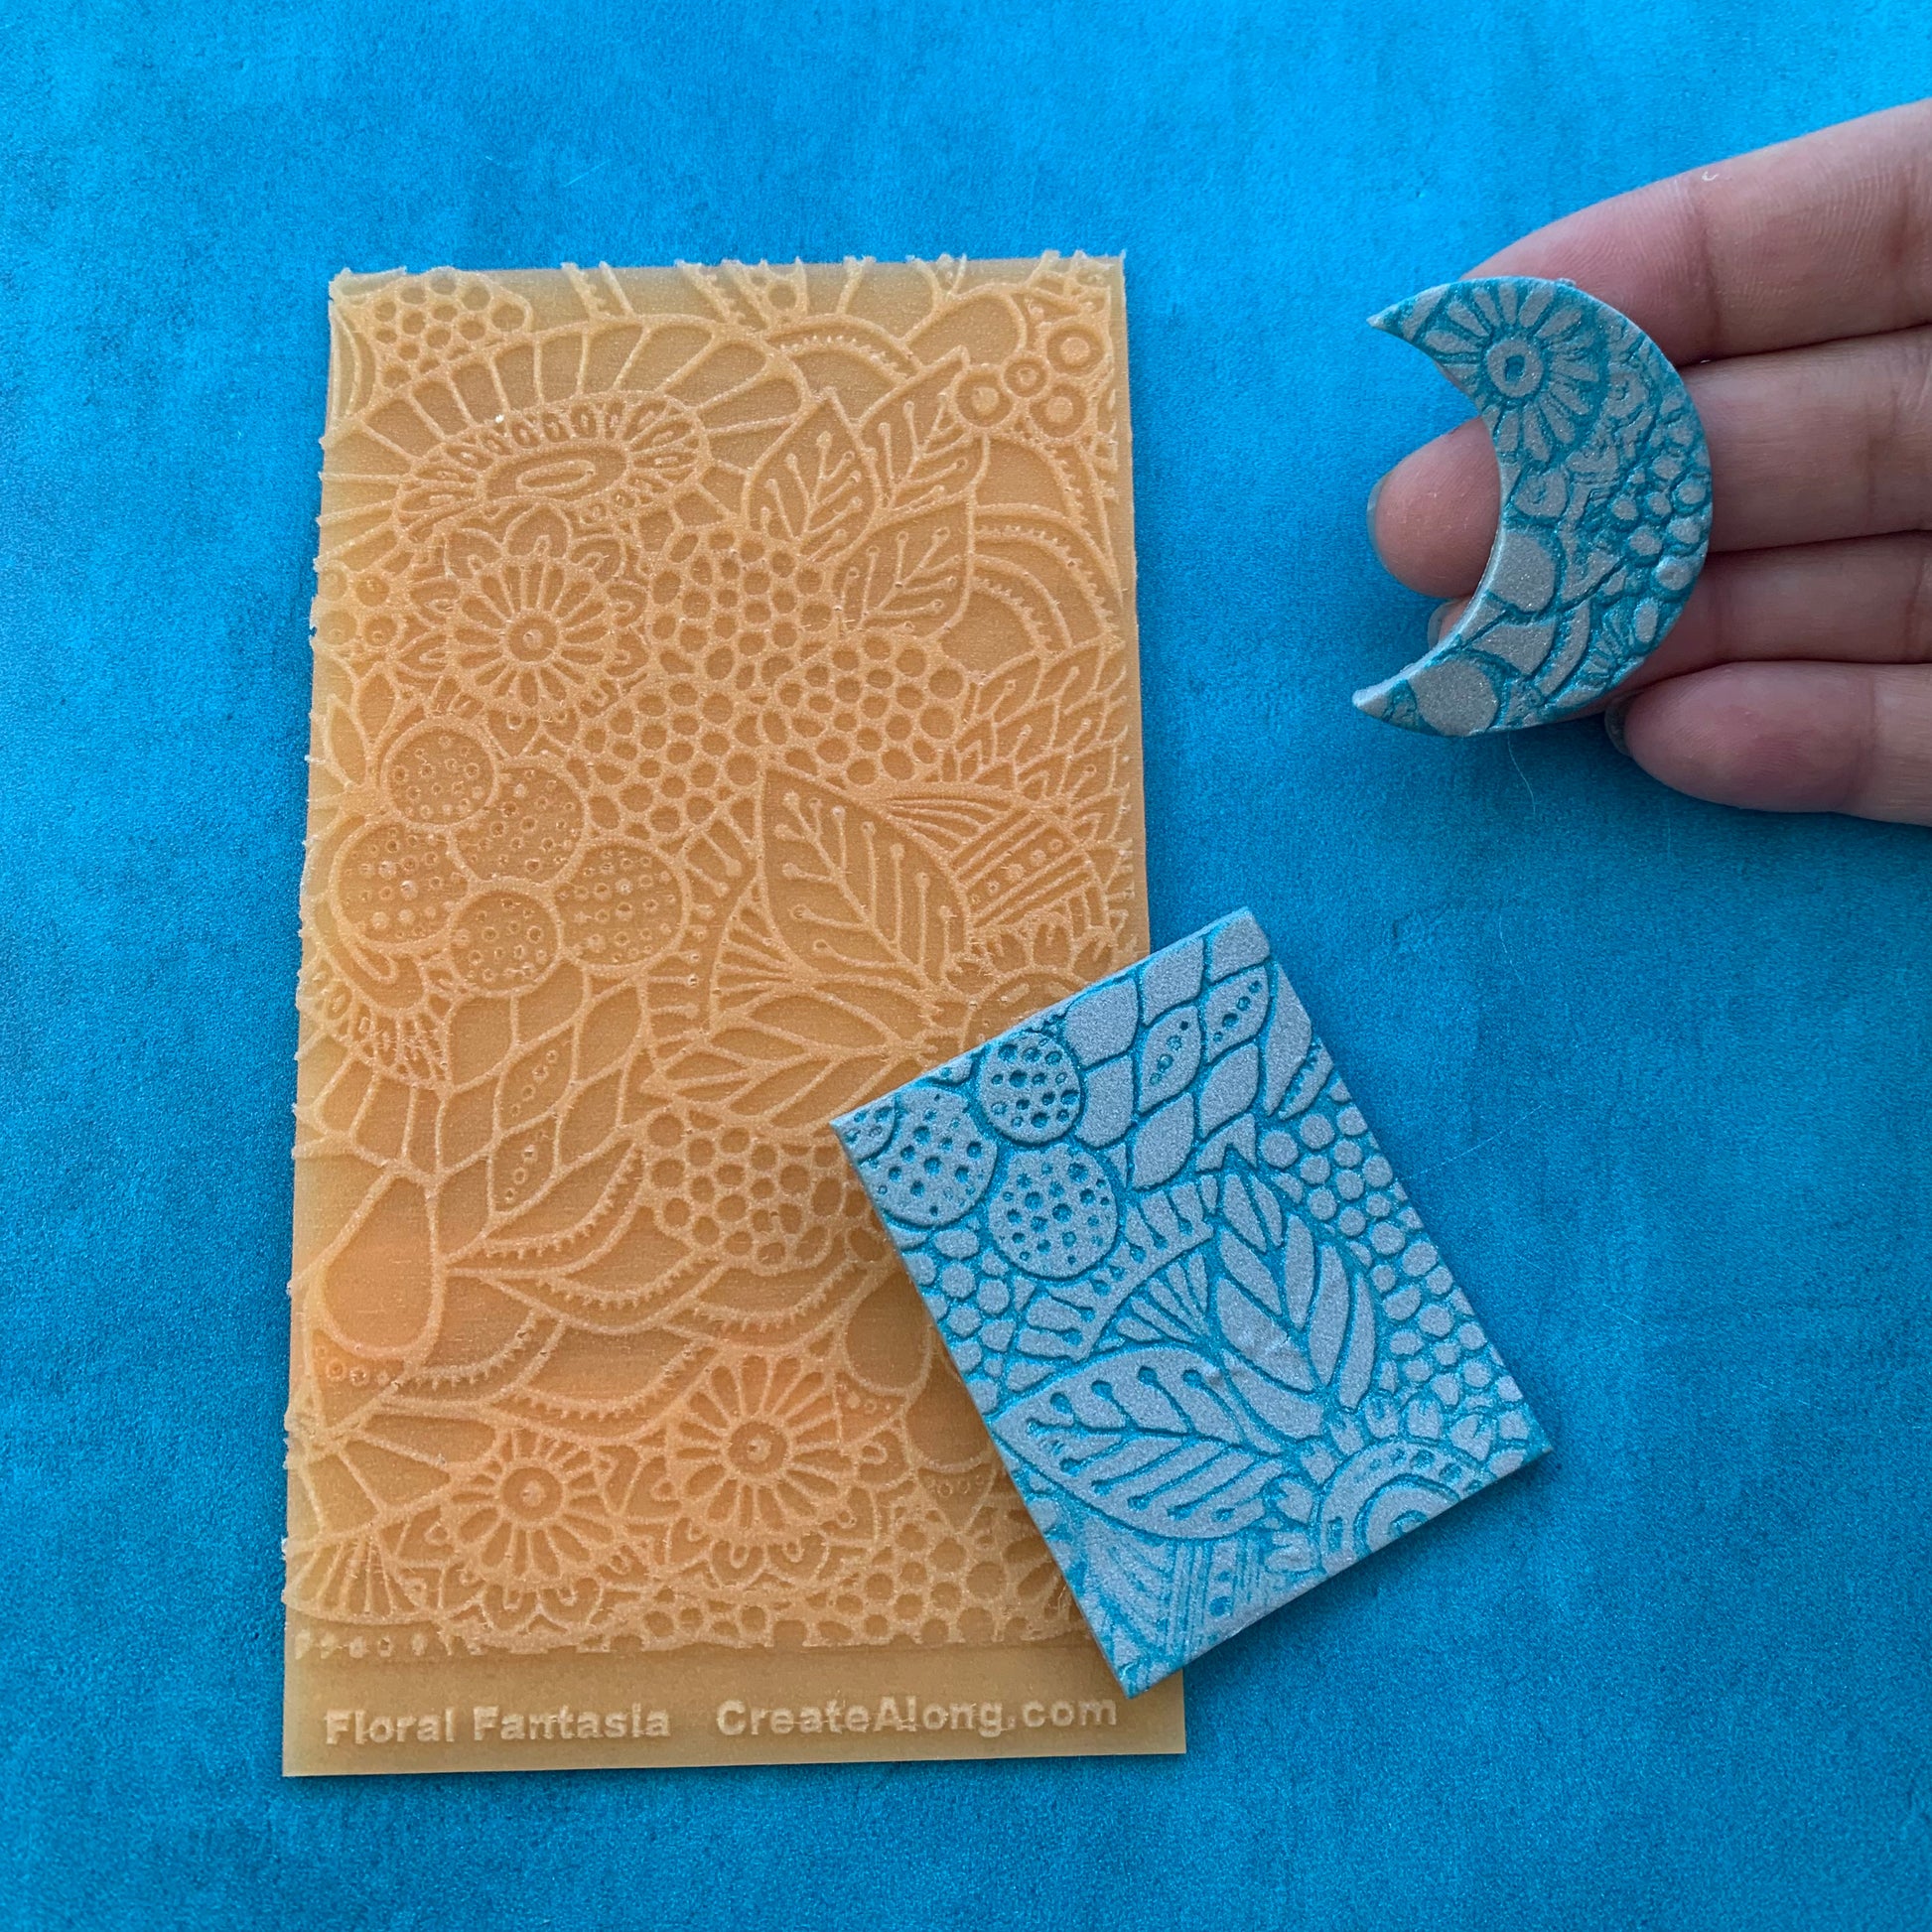 Polymer Clay Texture Sheets, Polymer Clay Screen Stencil